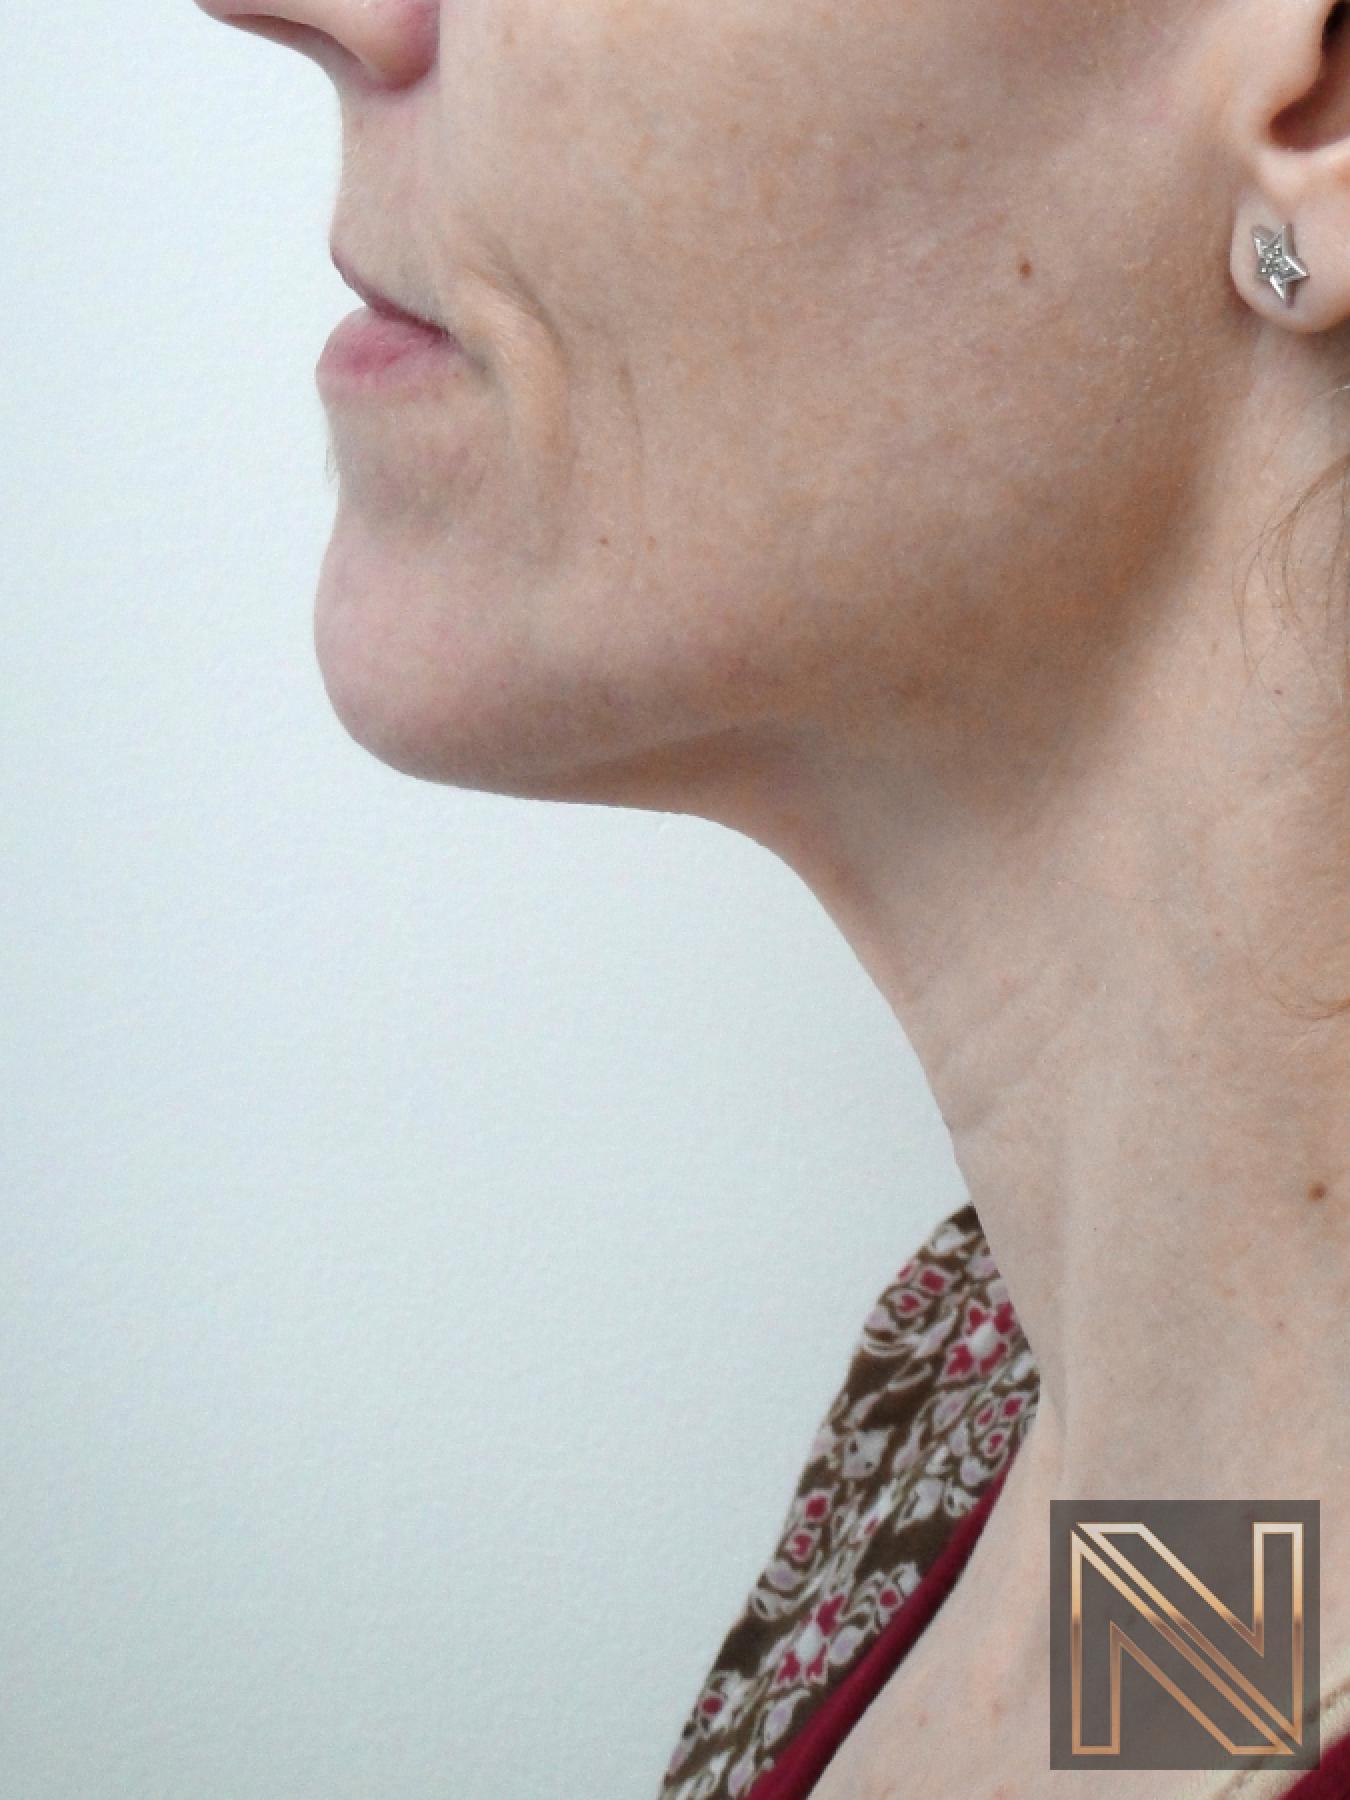 Ultherapy®: Patient 1 - After  